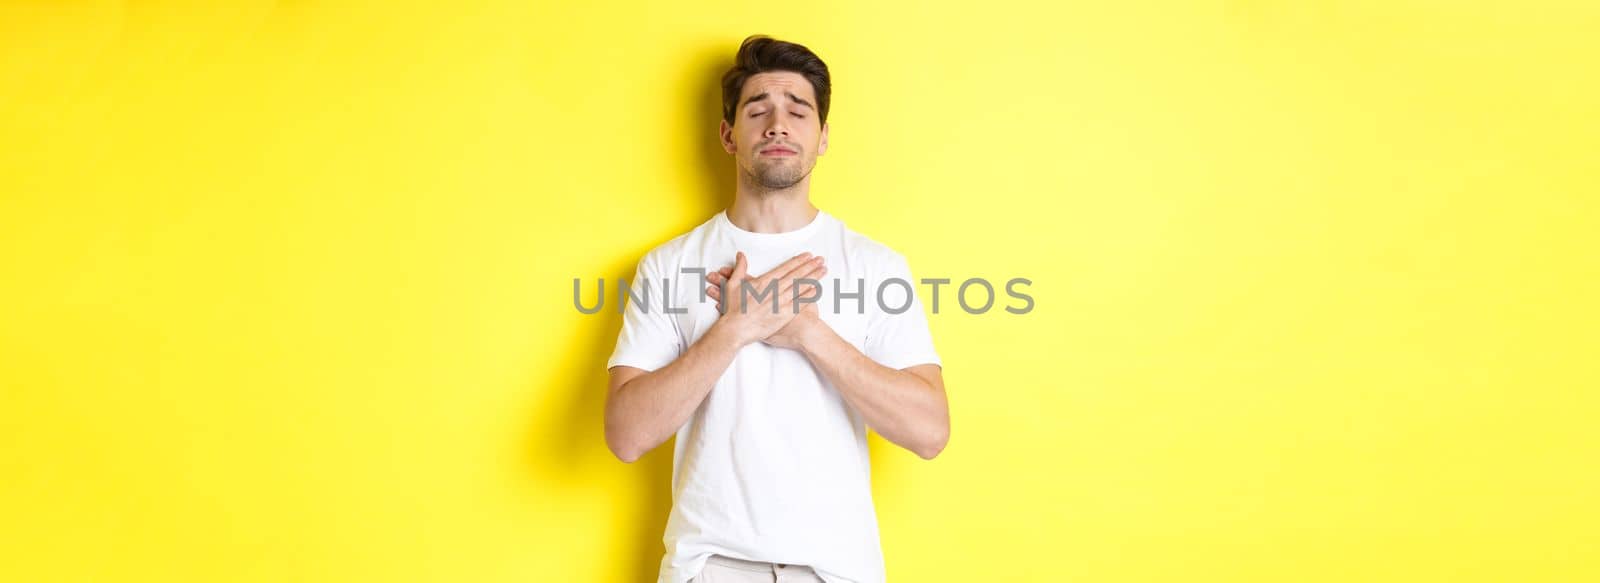 Romantic and nostalgic man holding hands on heart, close eyes and remember something, standing over yellow background.